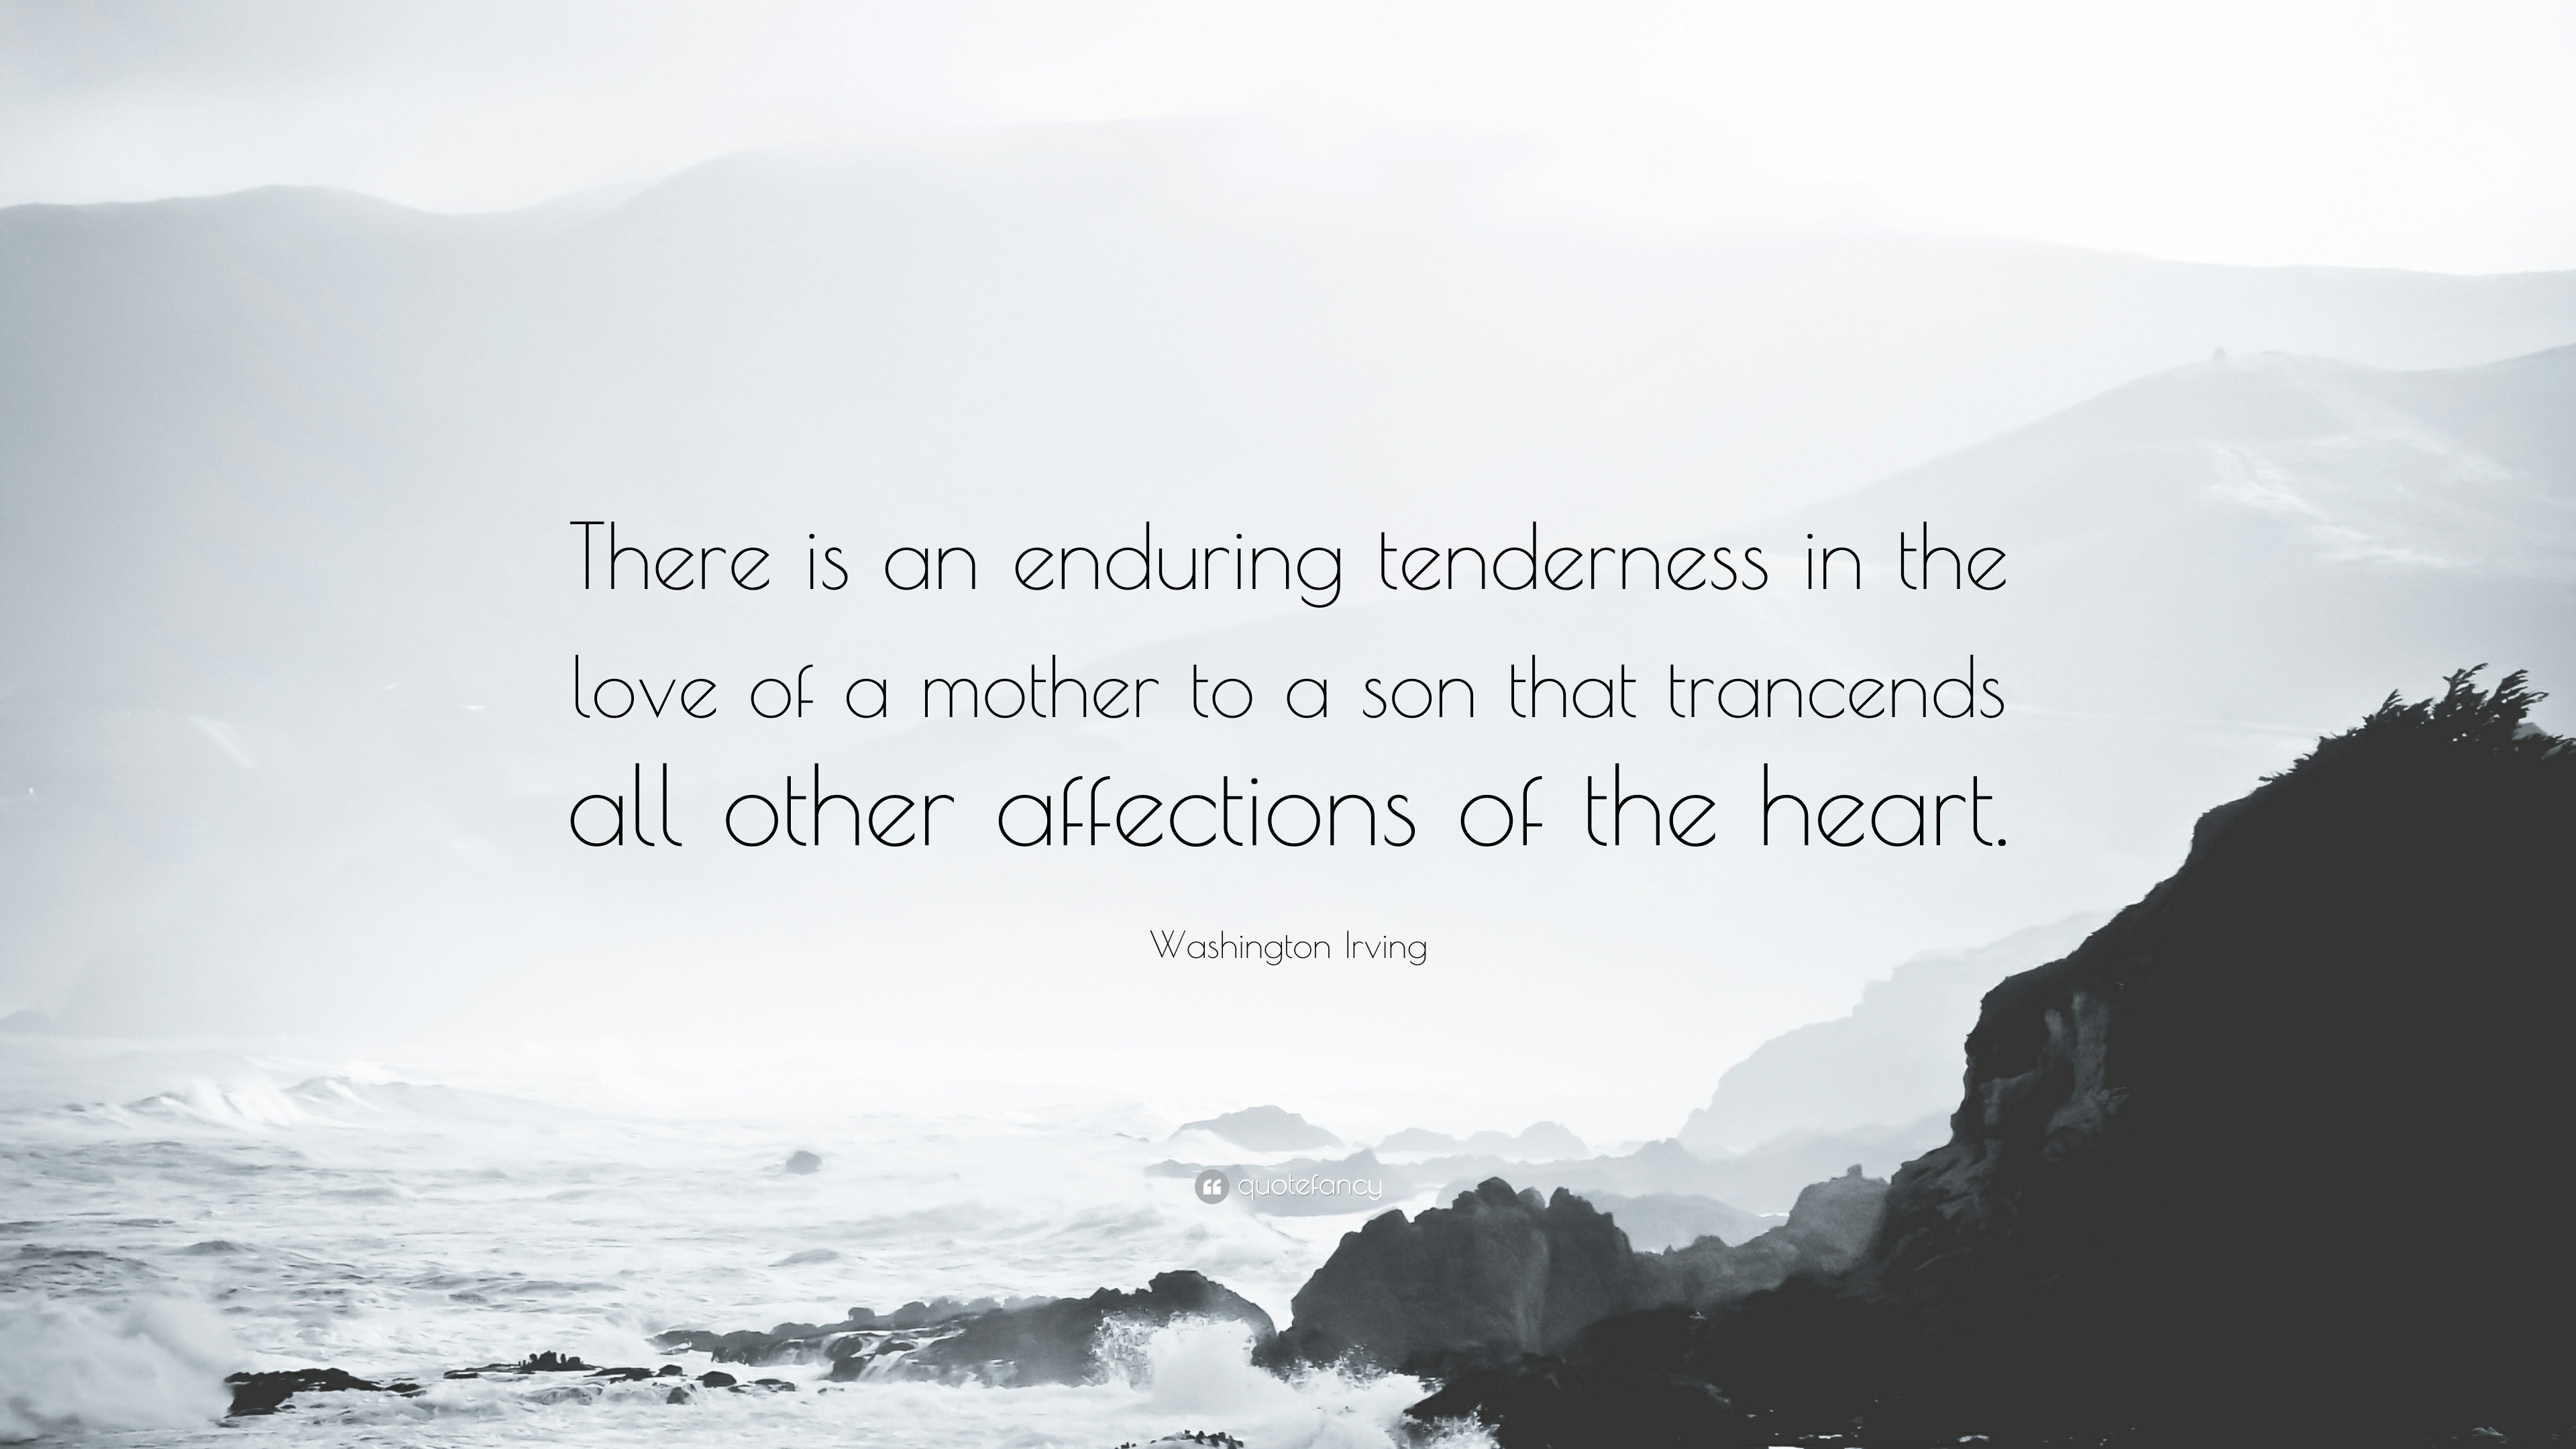 Washington Irving Quote “There is an enduring tenderness in the love of a mother